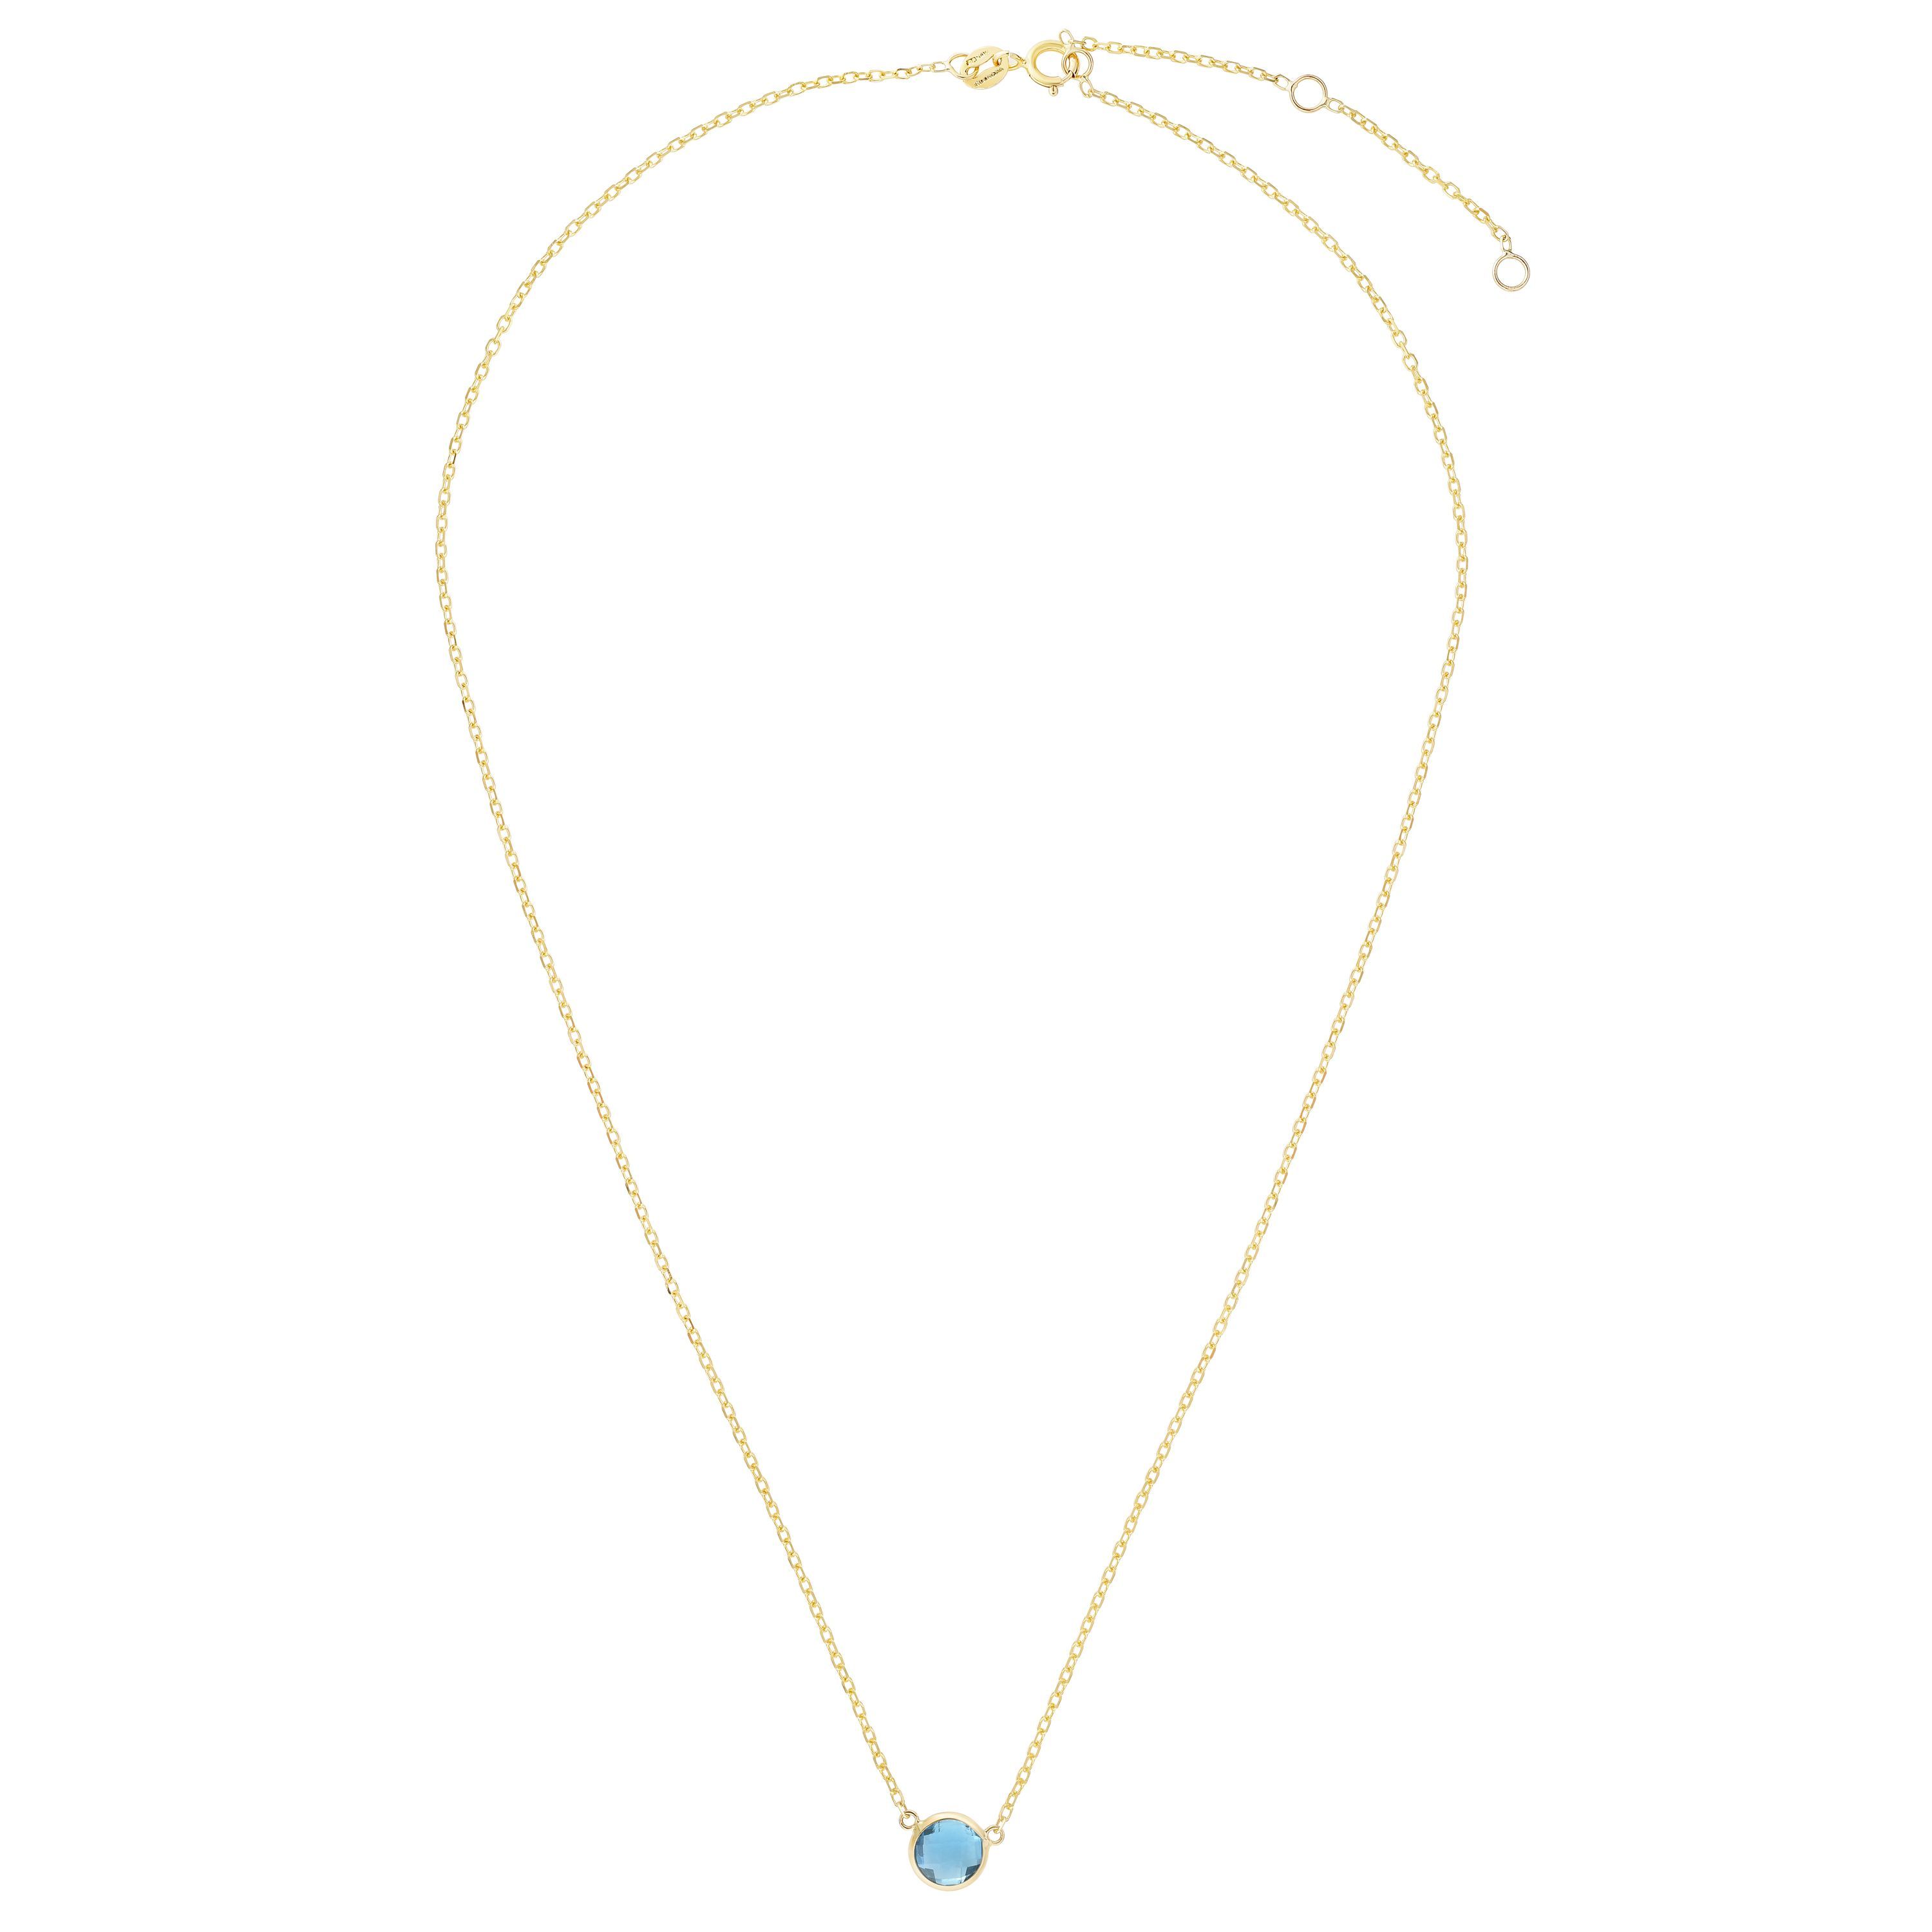 14kt Gold 17 inches Yellow Finish Extendable Colored Stone Necklace with Spring Ring Clasp with 0.9000ct 6mm Round Blue Topaz